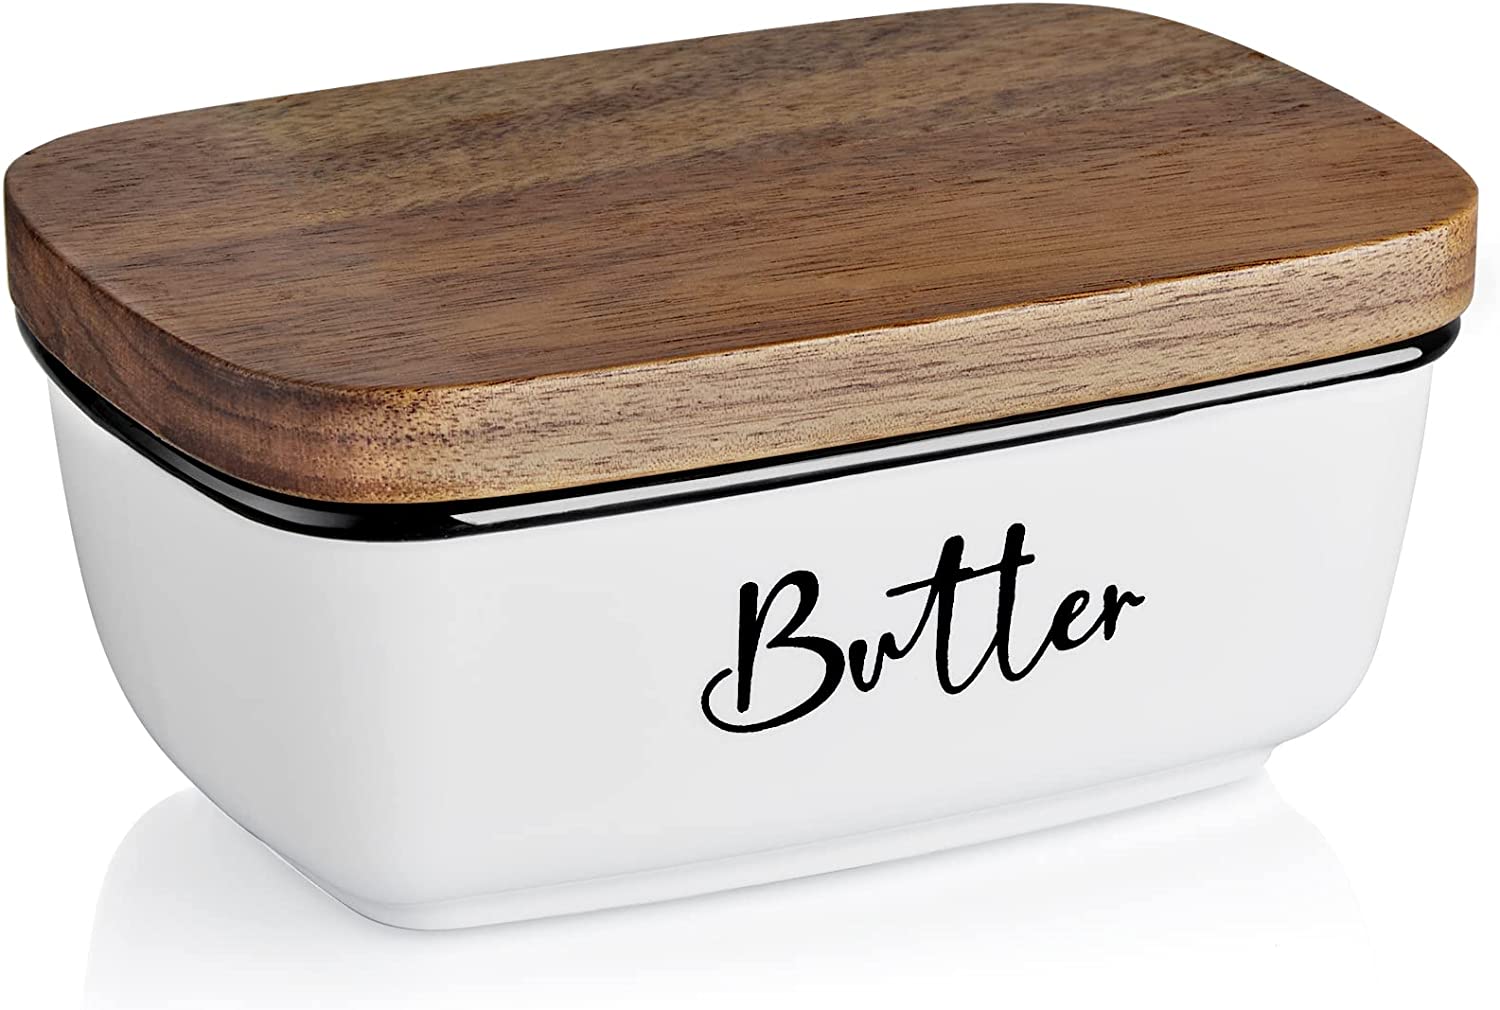 ALELION Acacia Wood Lid Butter Dish